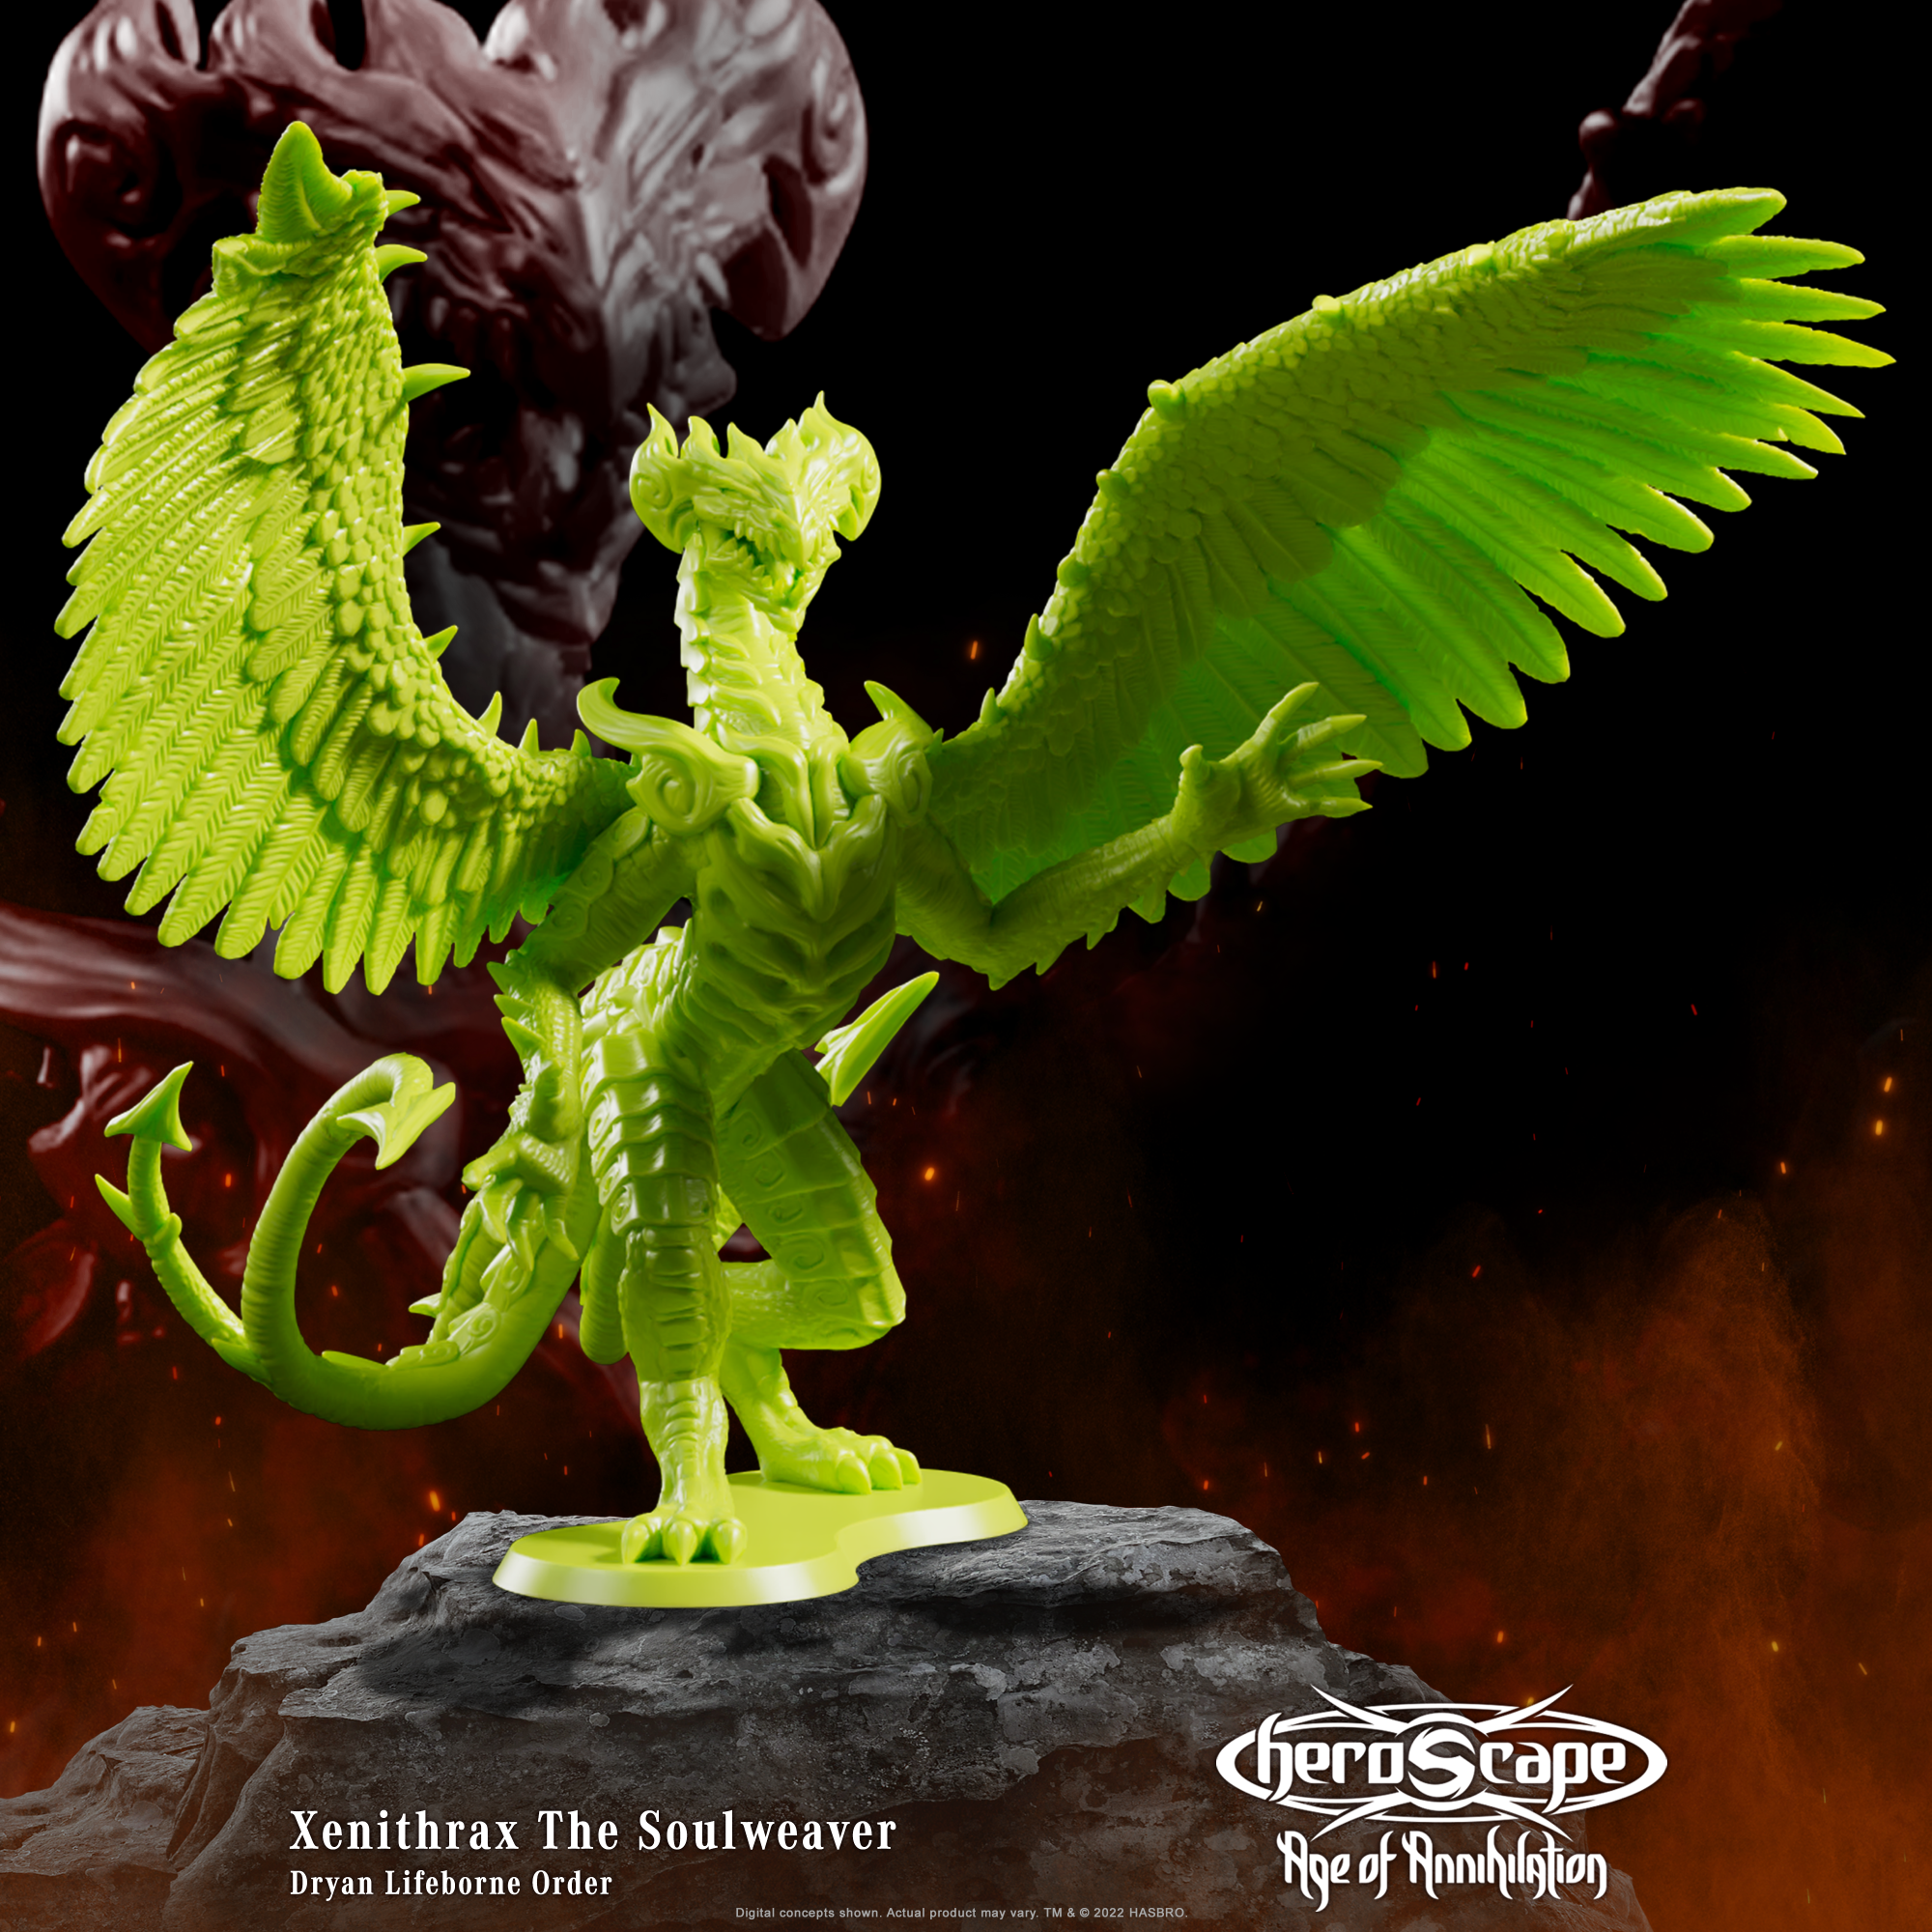 Product shot of Heroscape: Age of Annihilation miniatures wargame